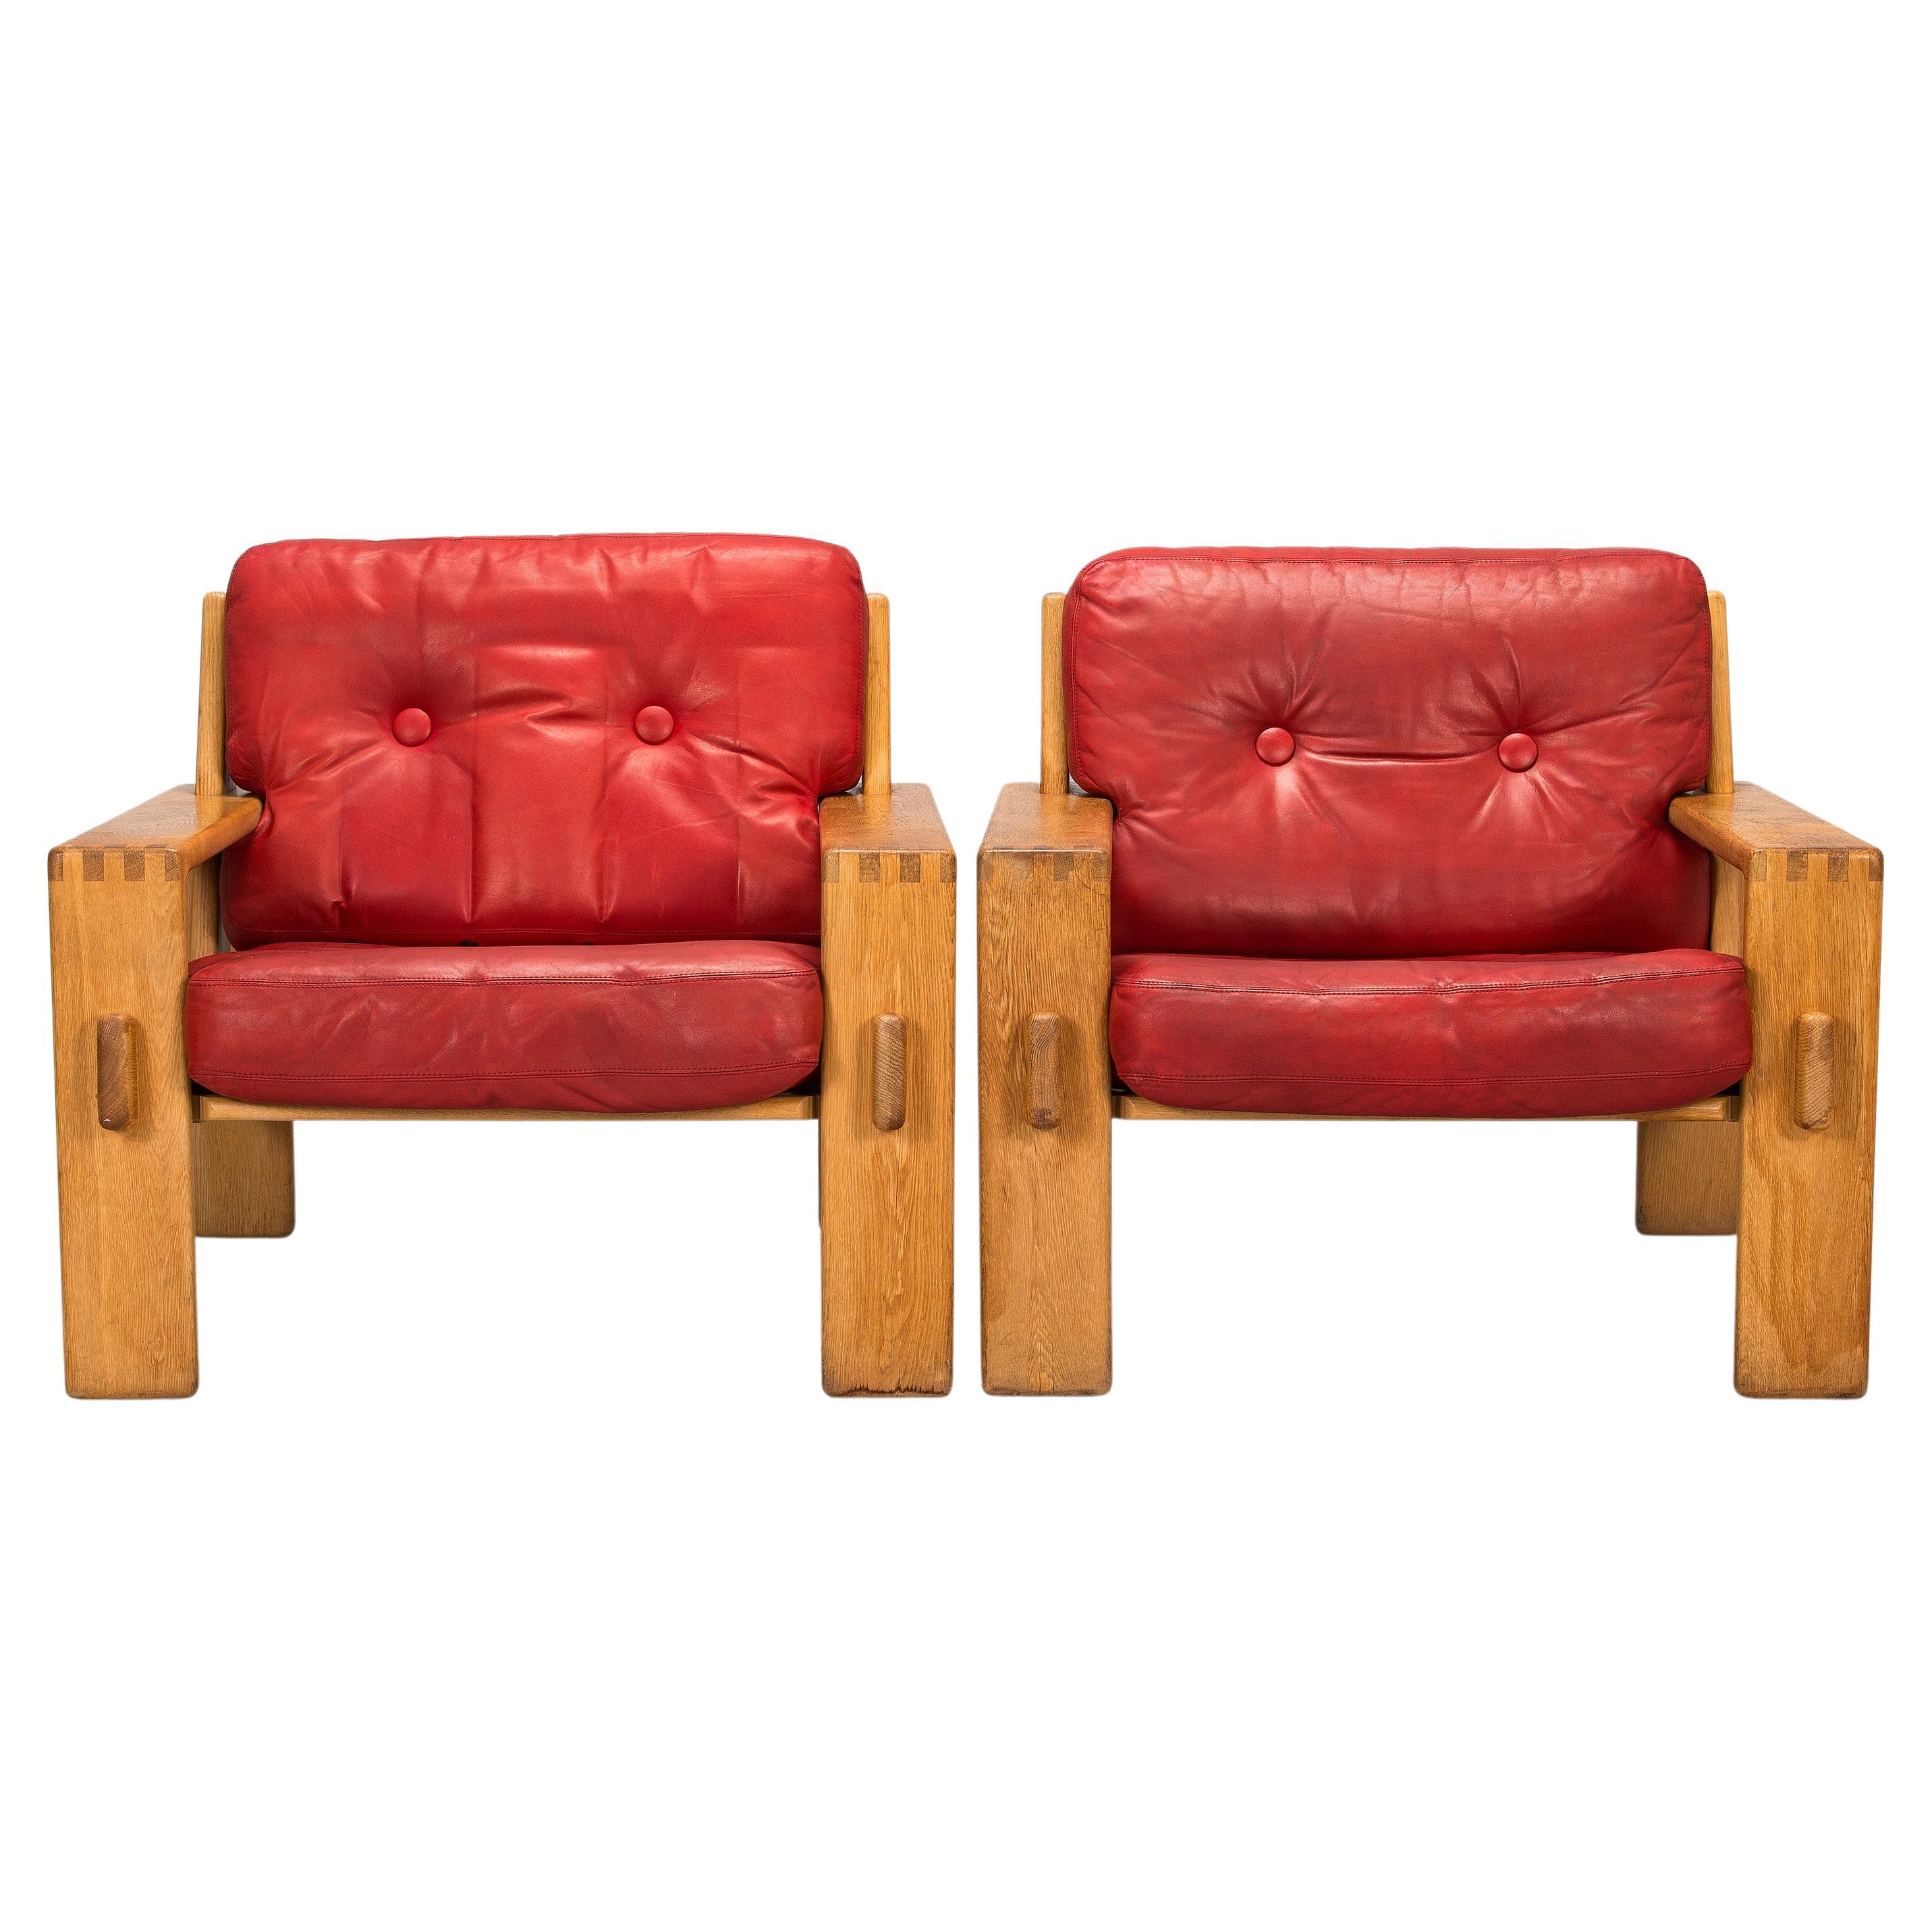 Esko Pajamies, A pair of 1970s 'Bonanza' armchairs for Asko, Finland.
Solid oak, frame original red leather upholstery. Measures: Width 80 cm. Height 74 cm, height to seat 39 cm.
Good condition wear due to age.
A pair available price for 1